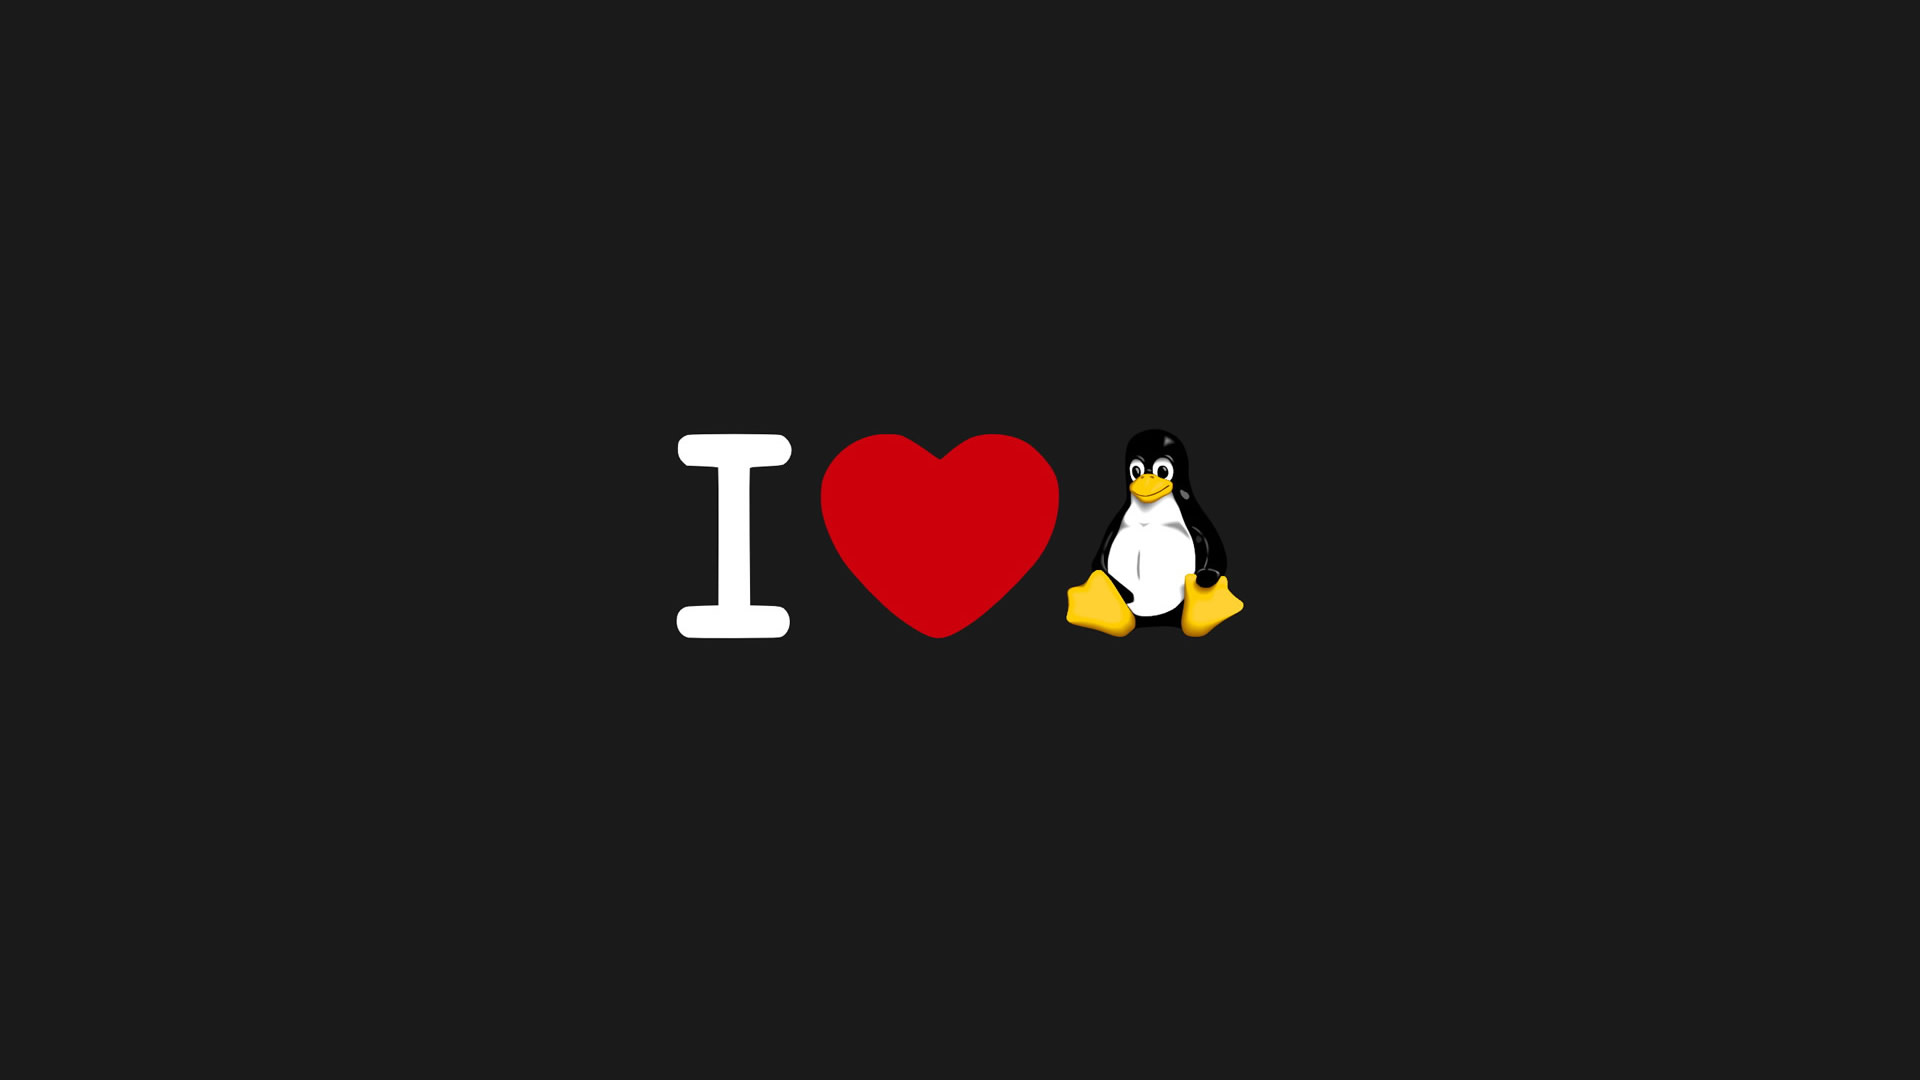 linux wallpapers HD